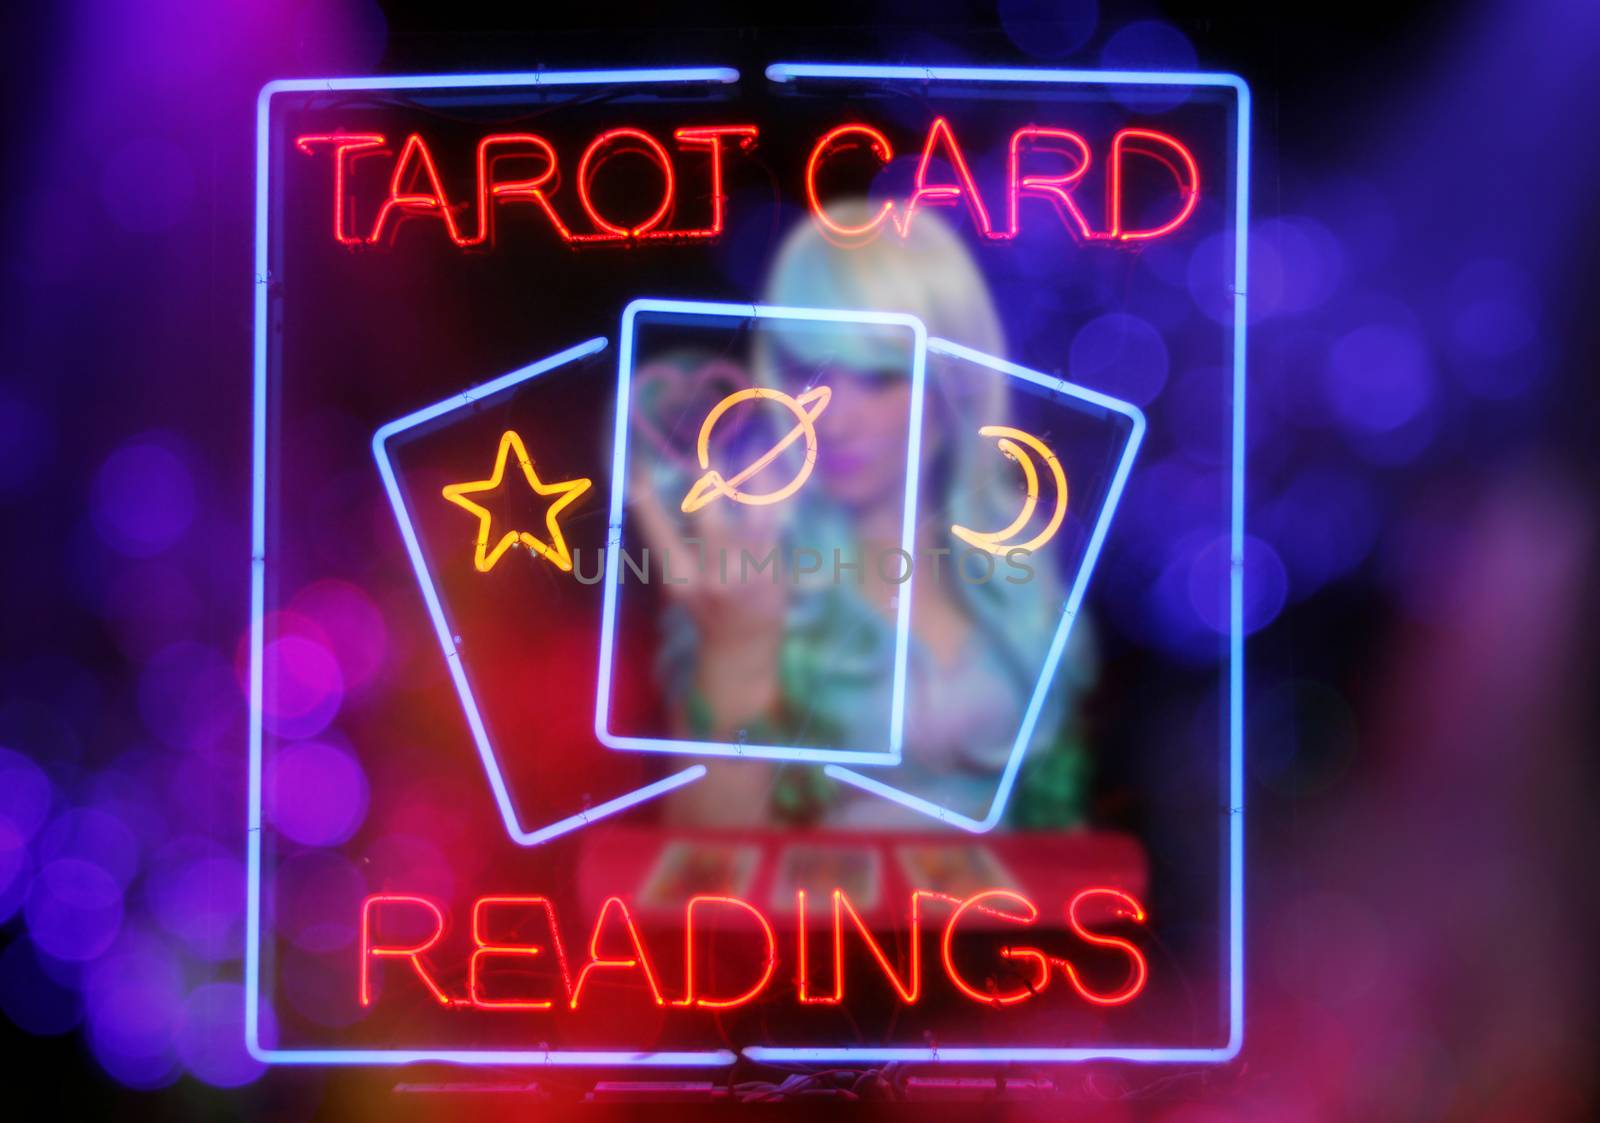 Tarot Card Readings Neon Sign in Window with Psychic Tarot Card Reader blurred in background